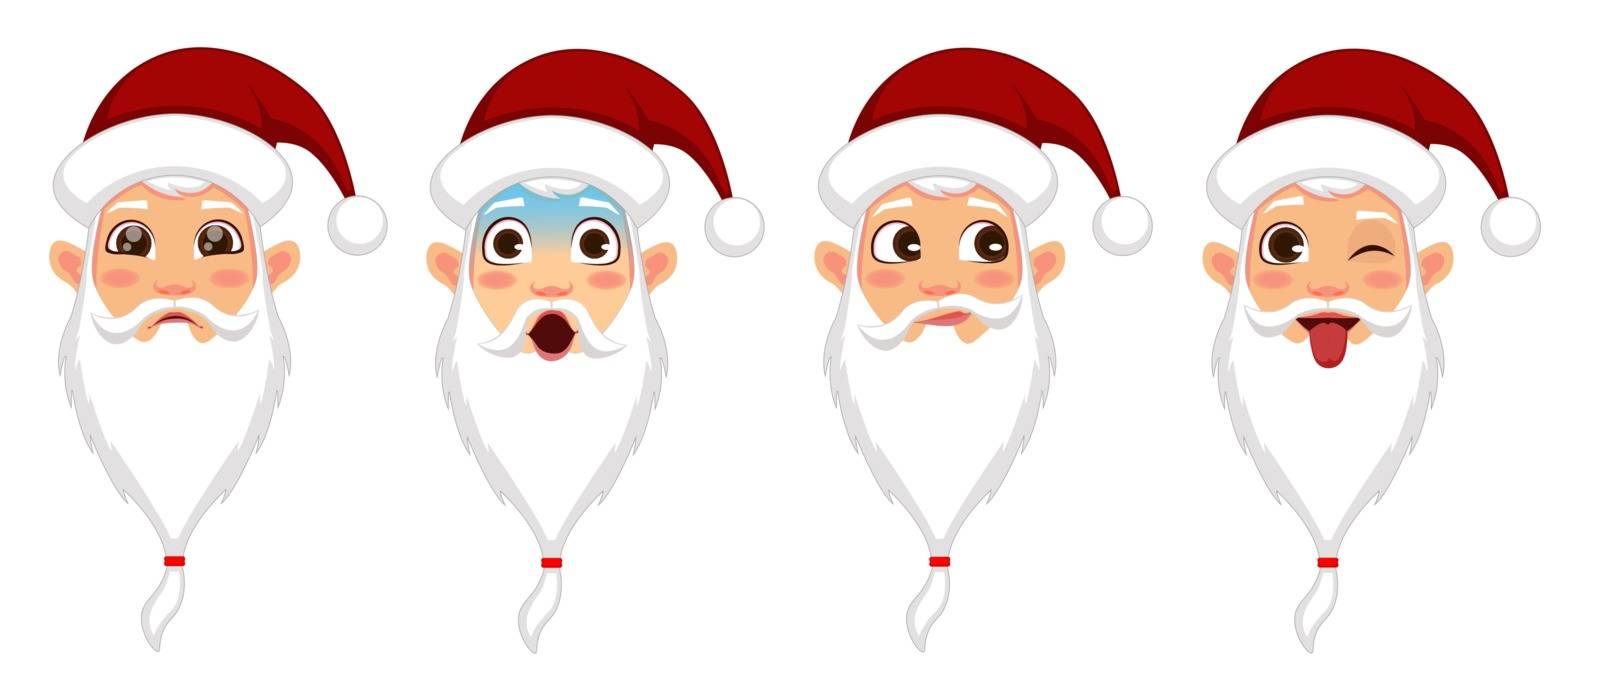 Santa Claus with different facial expressions set